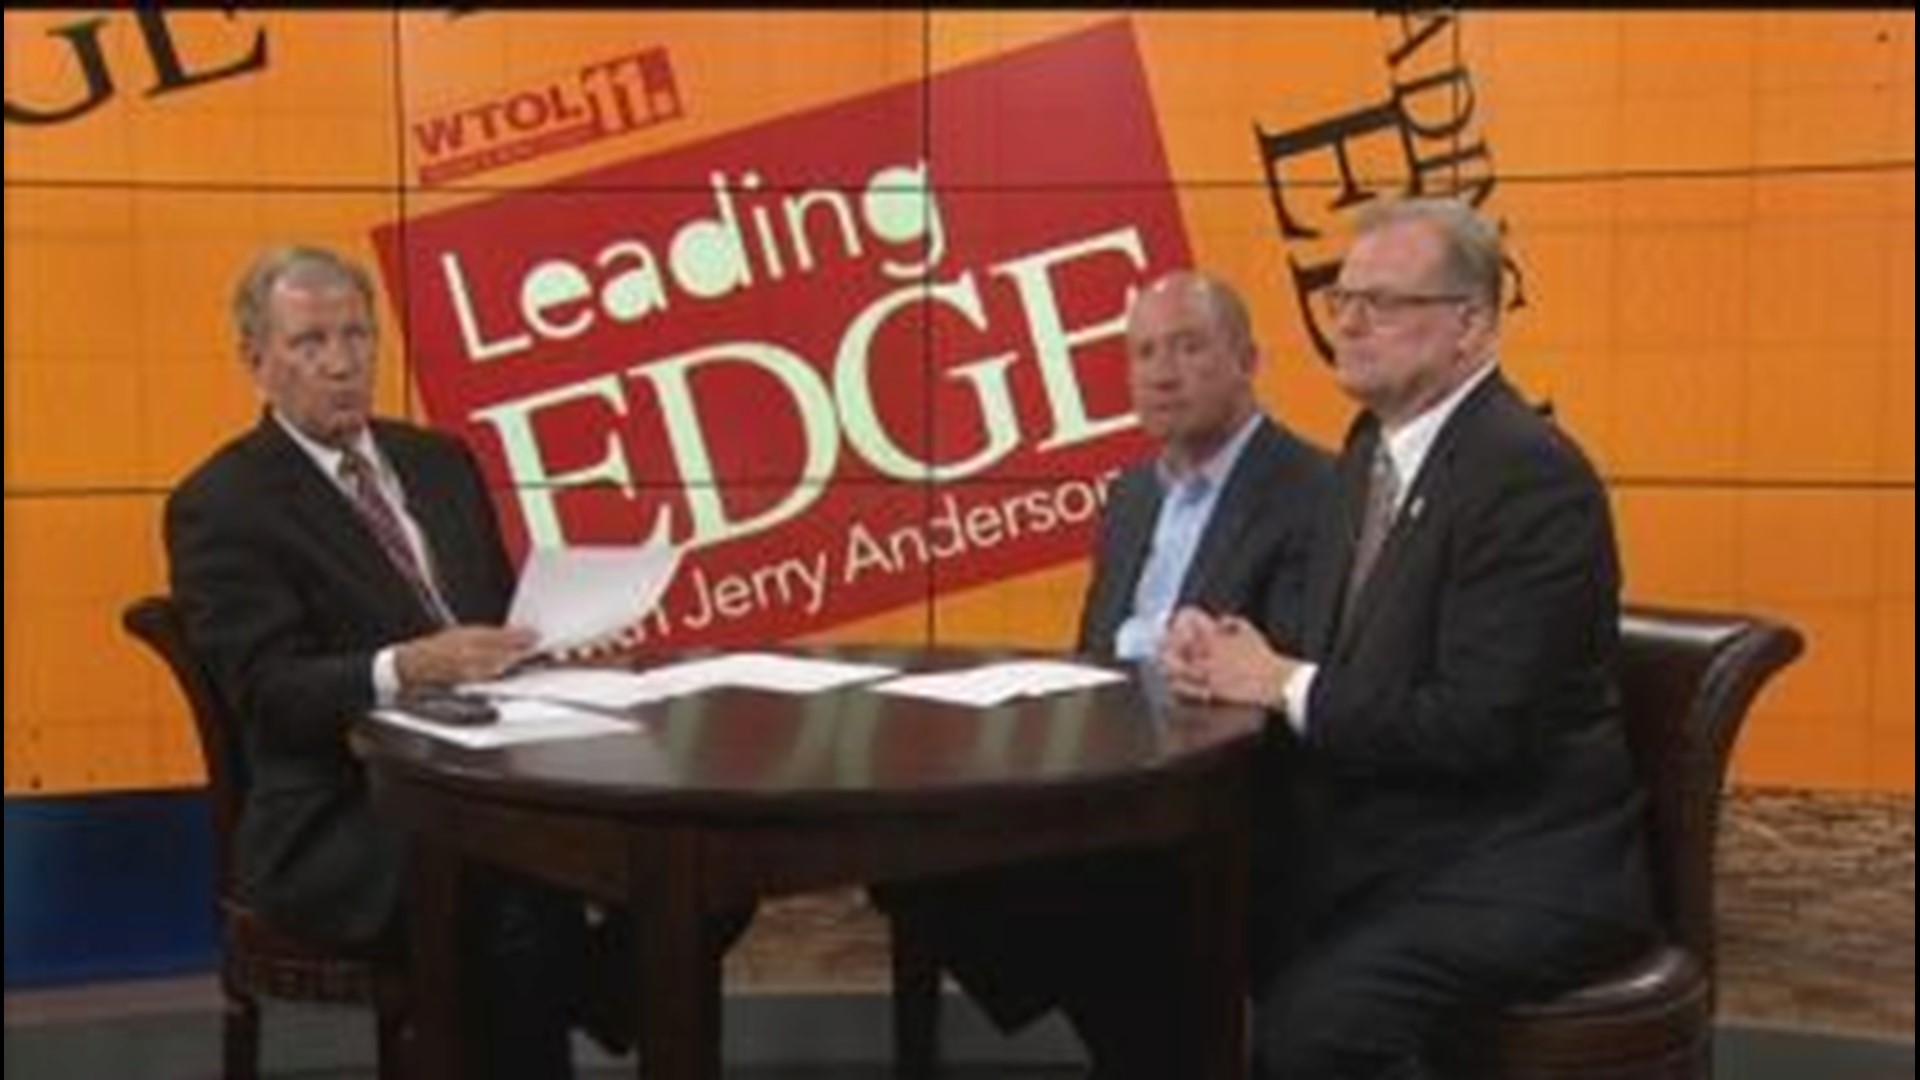 June 4: Leading Edge with Jerry Anderson - Segment 1